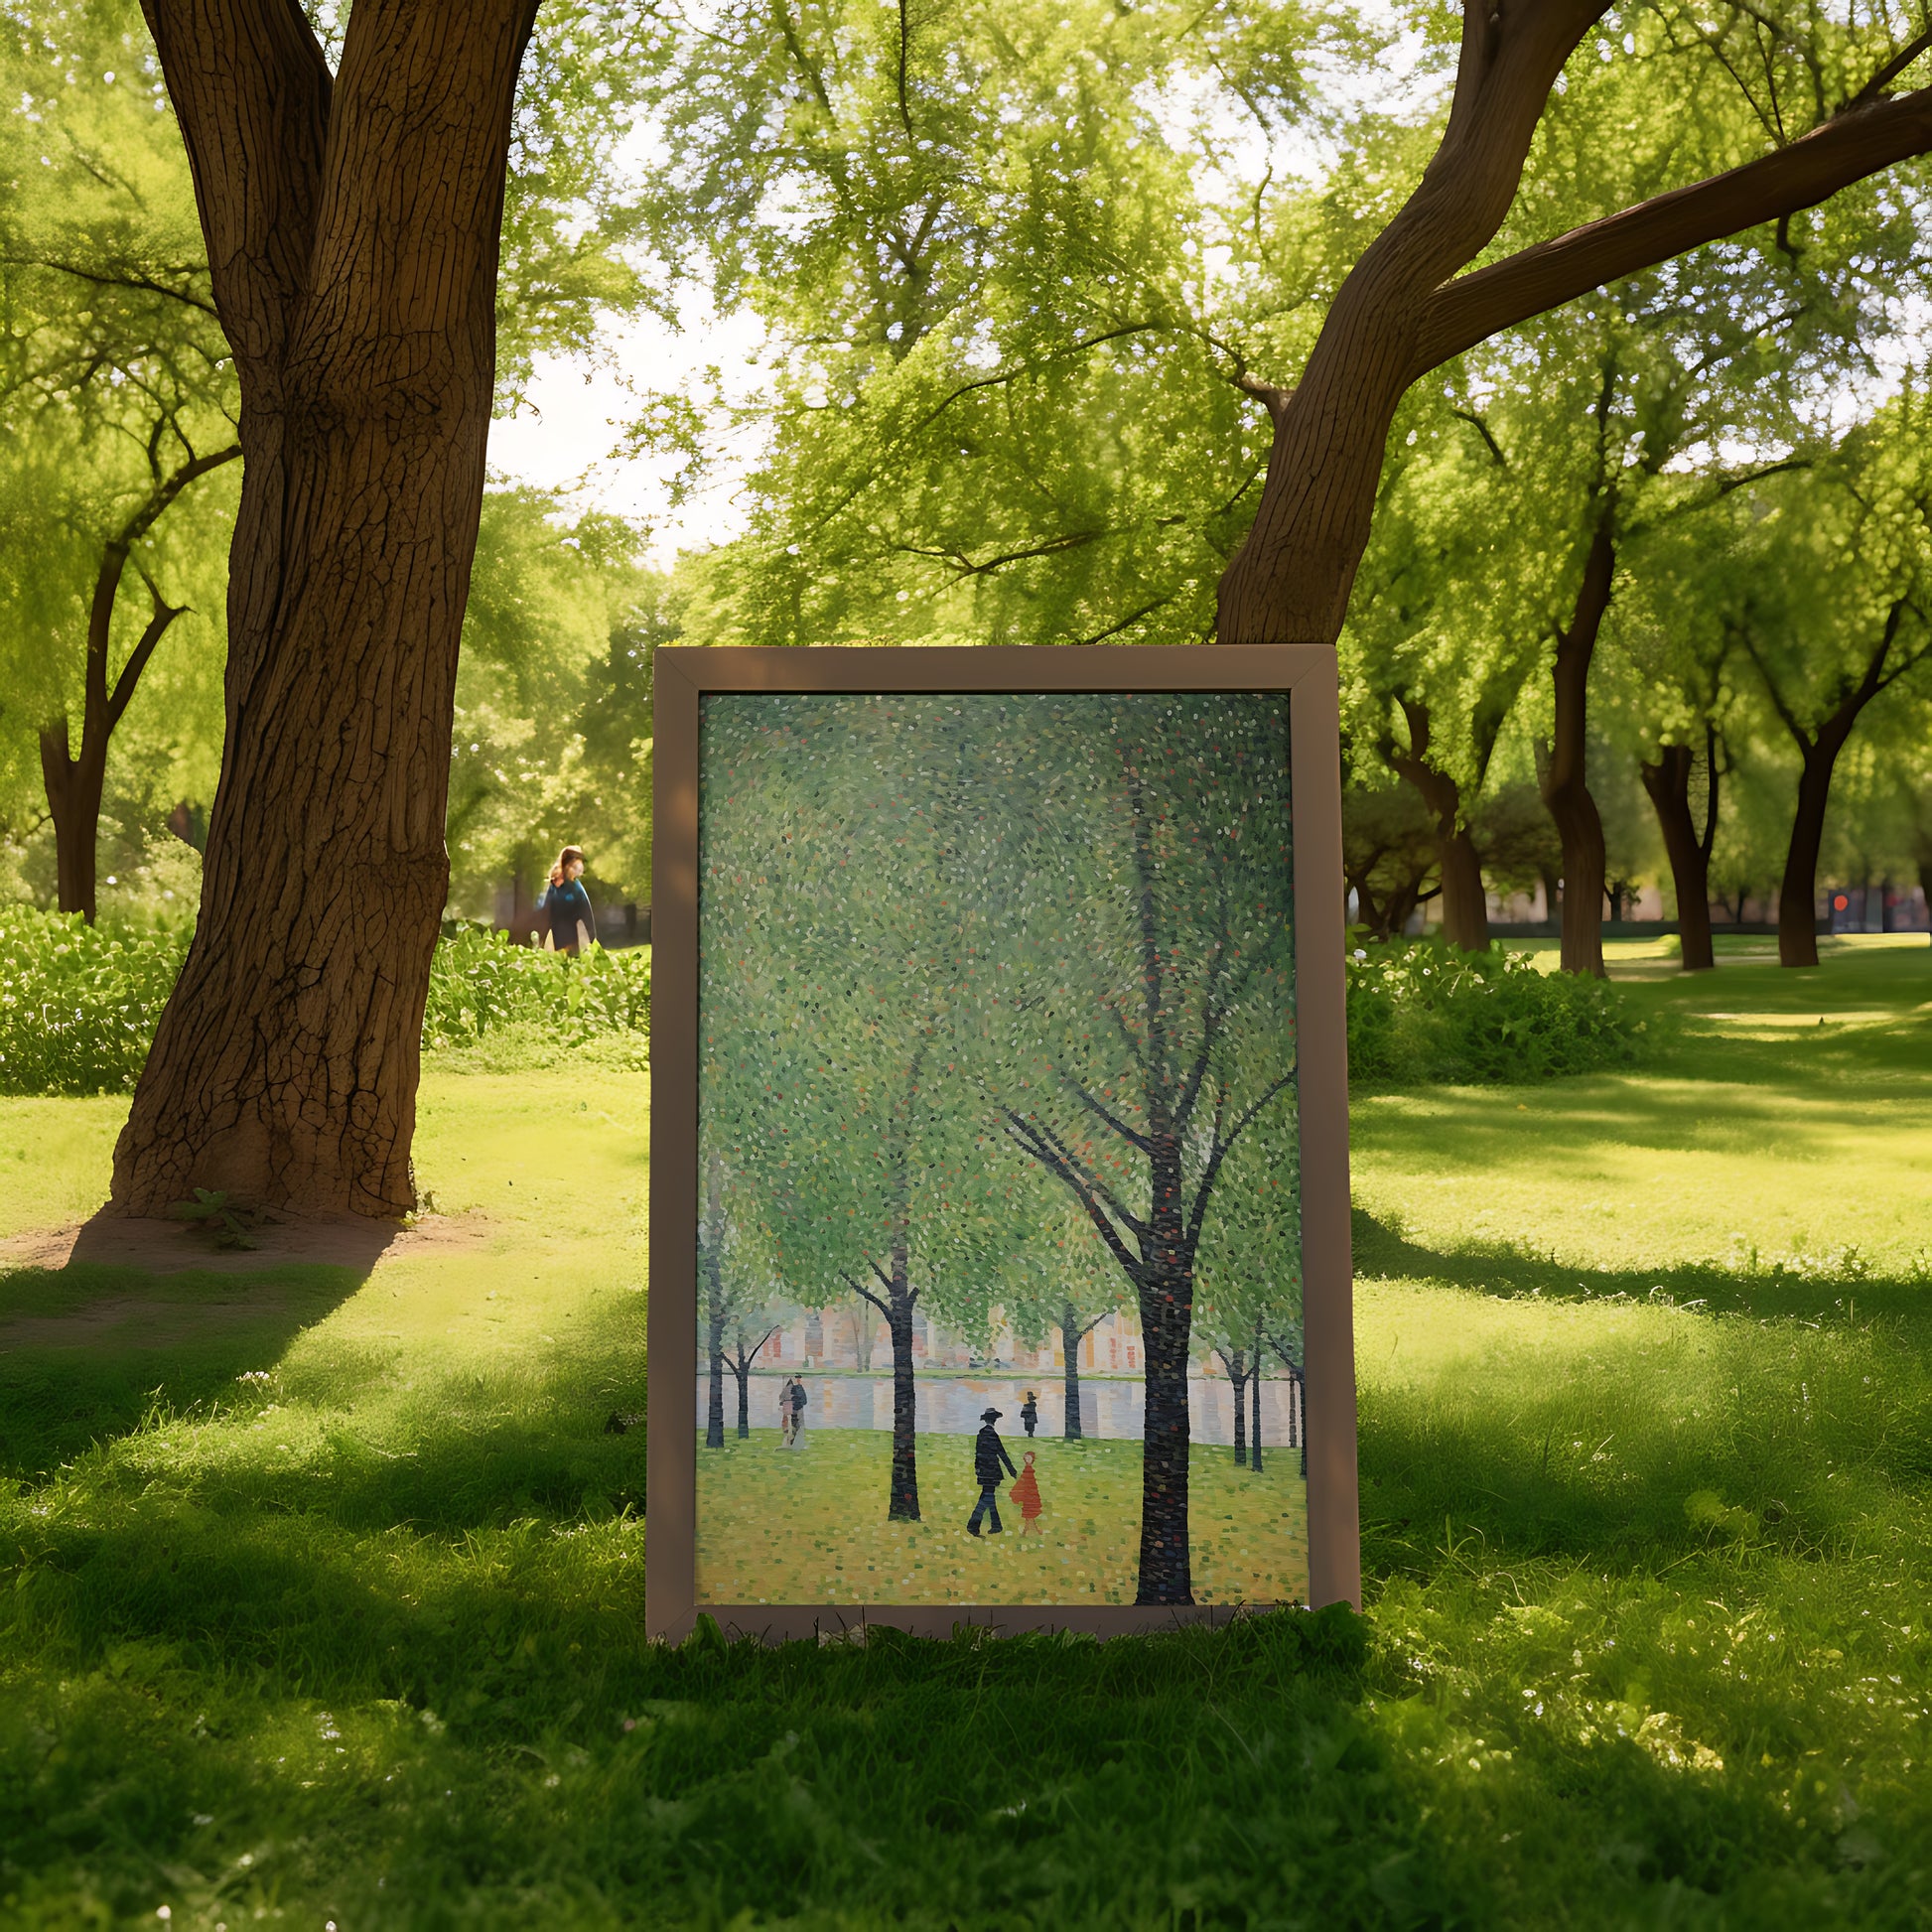 A painting of people and trees standing in a park, blending with the real park in the background.